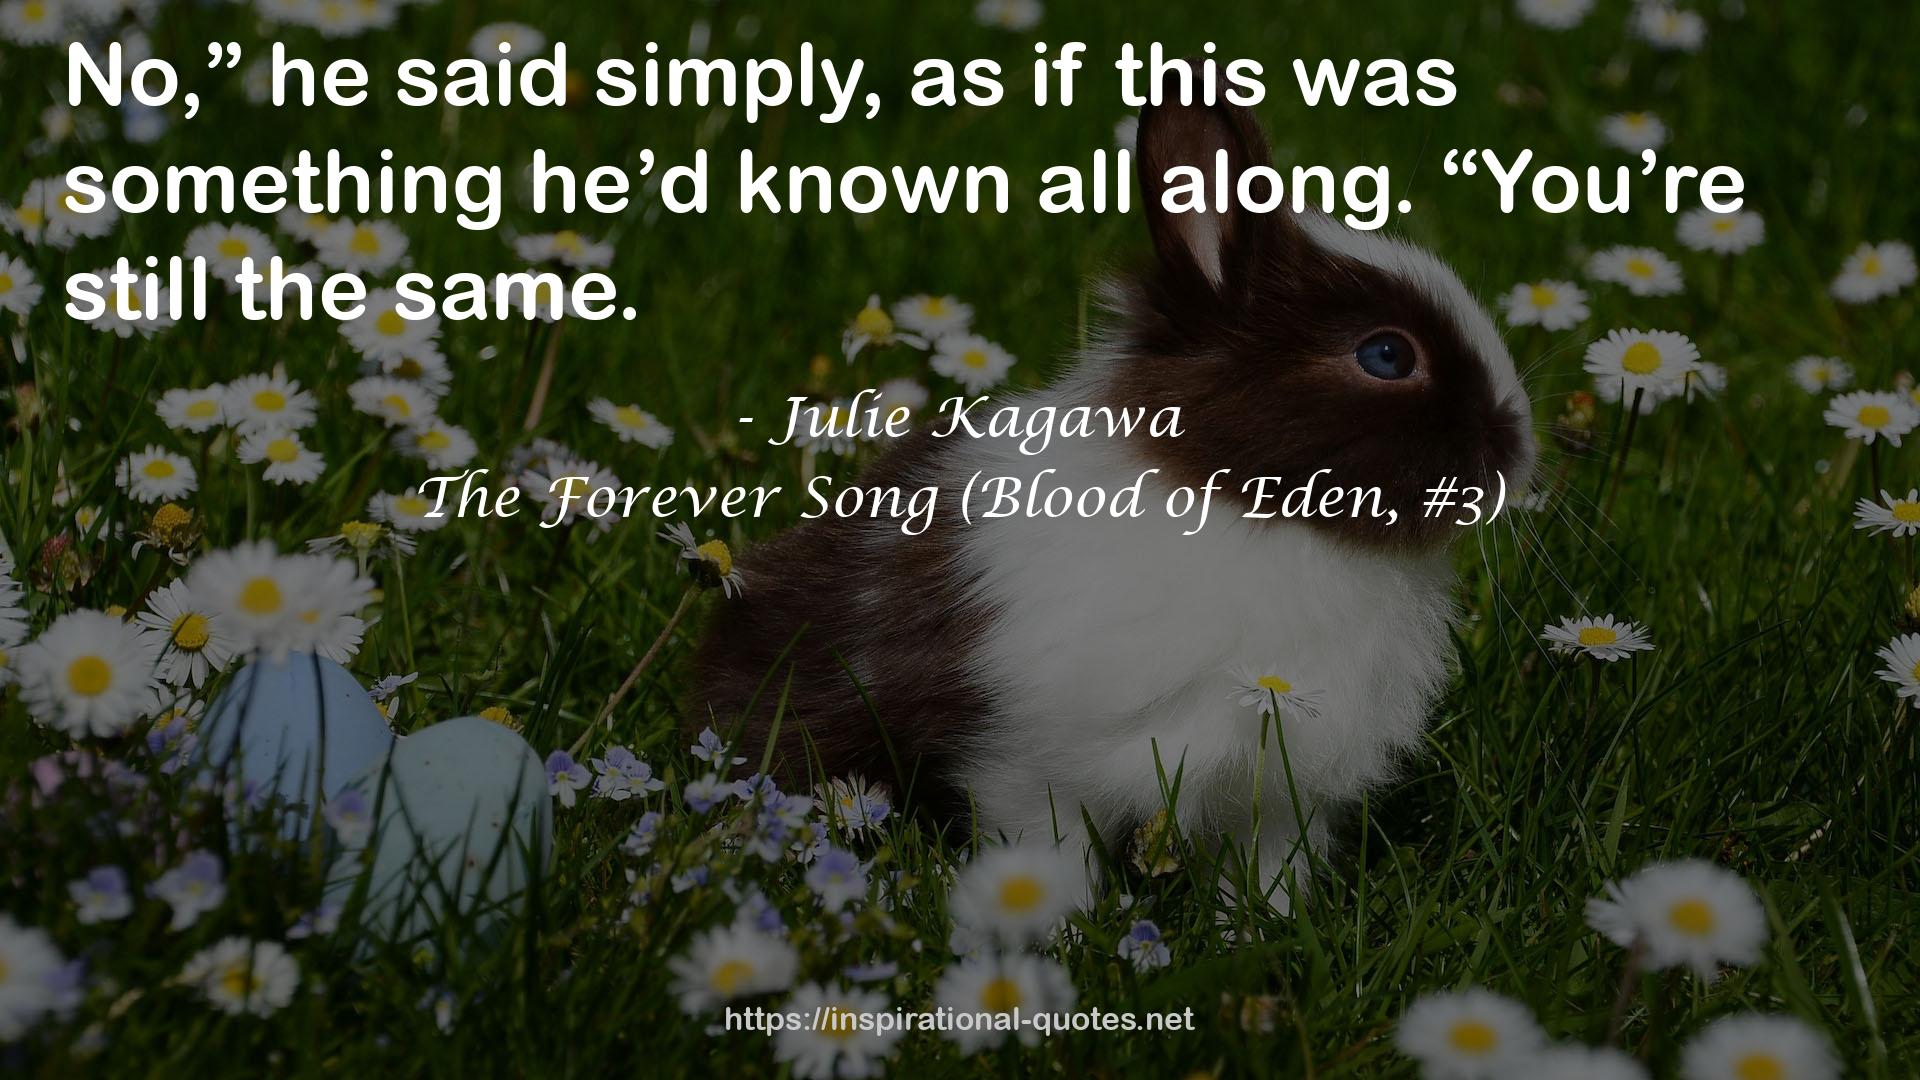 The Forever Song (Blood of Eden, #3) QUOTES